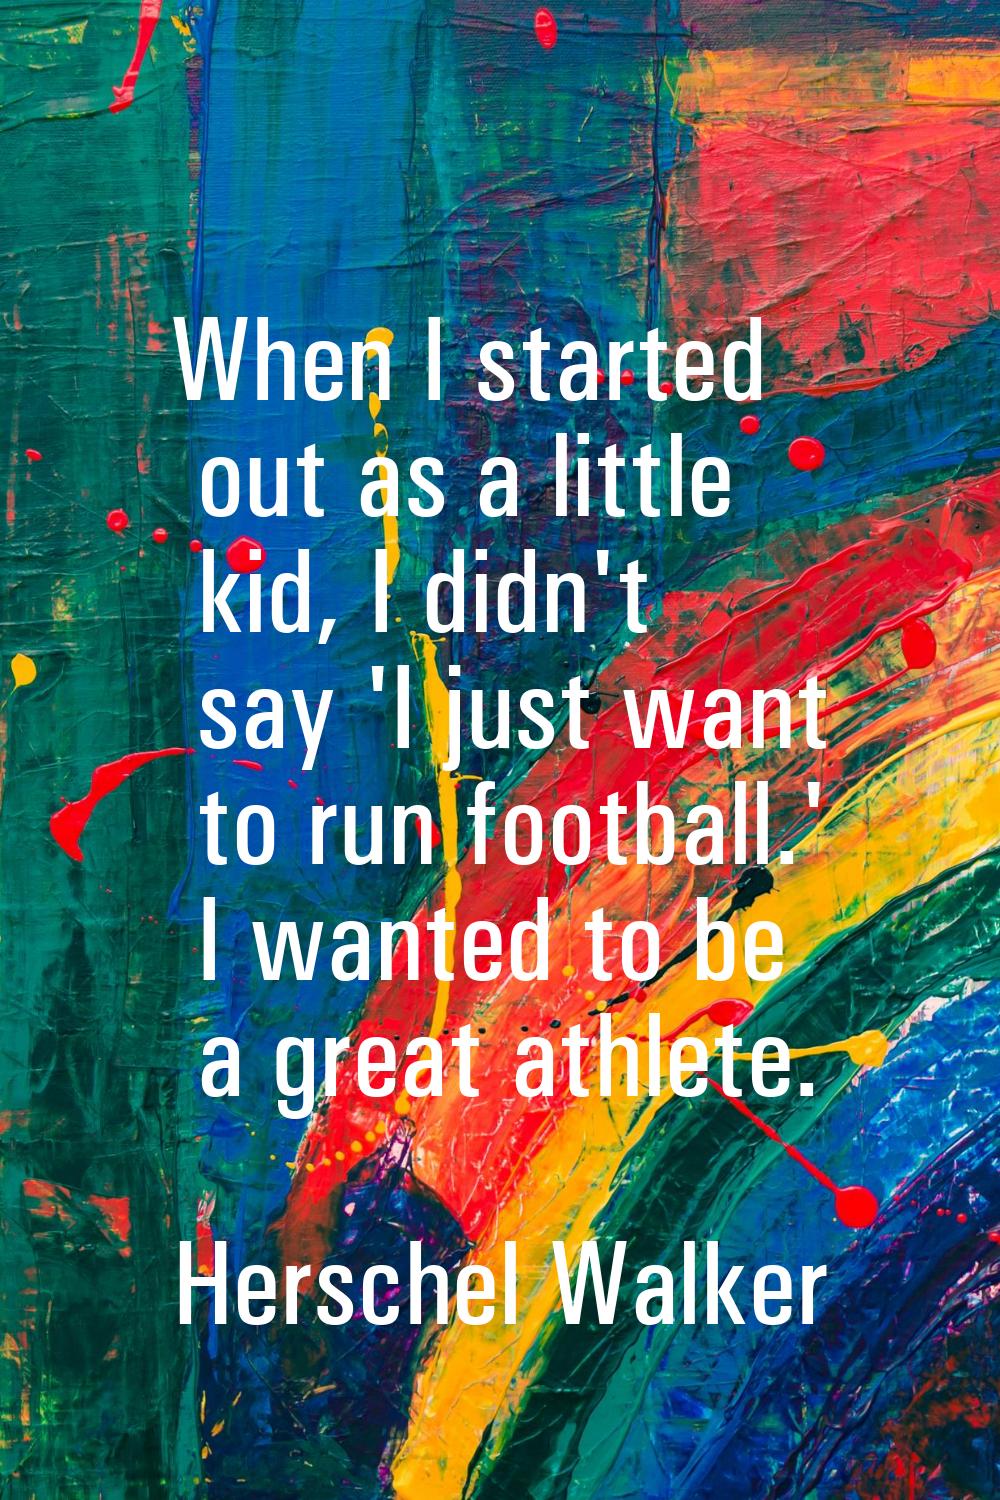 When I started out as a little kid, I didn't say 'I just want to run football.' I wanted to be a gr